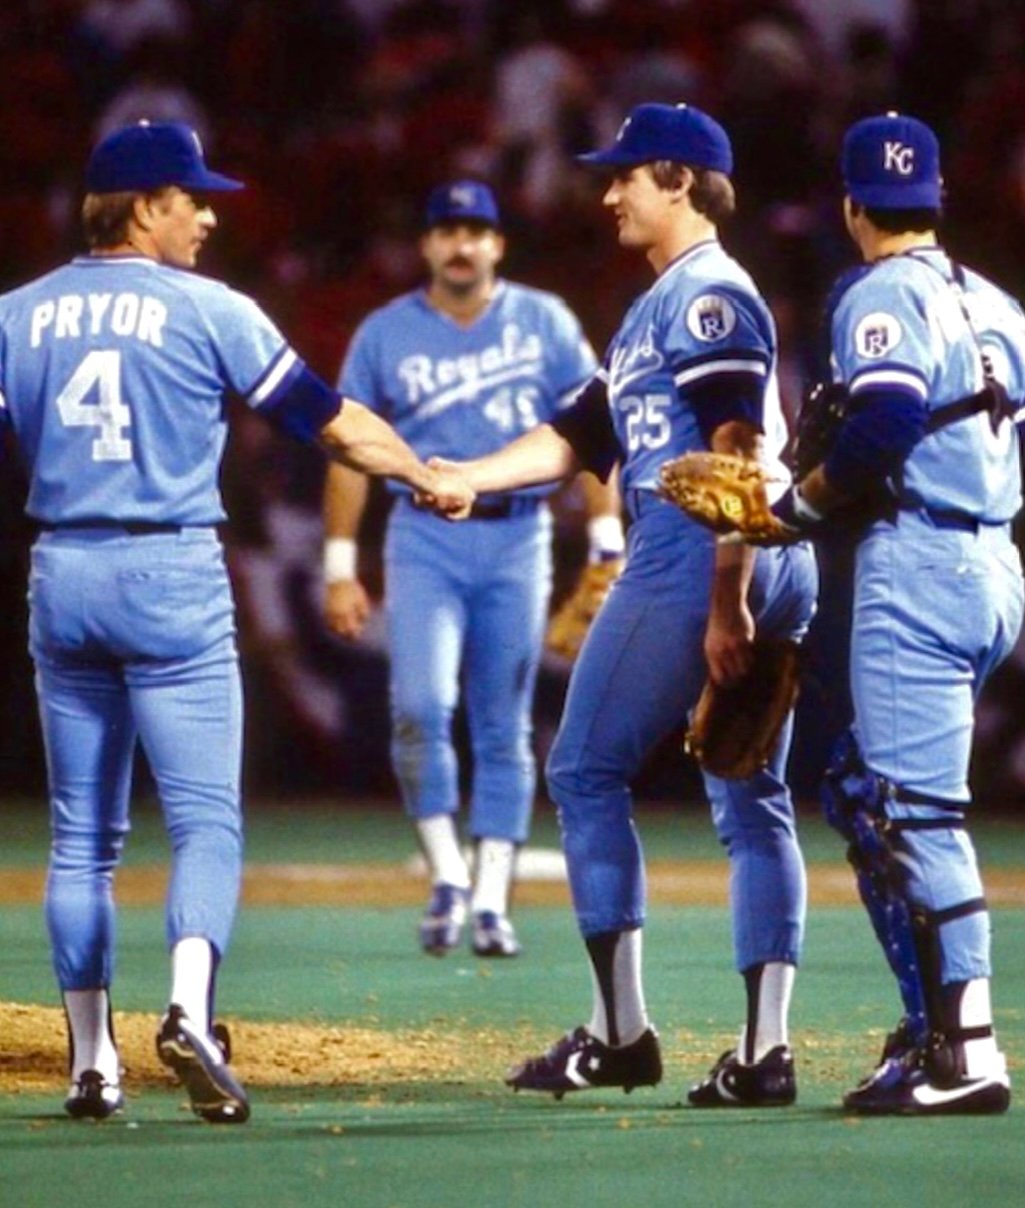 Former Royals second baseman Greg Pryor shakes hands with pitcher Danny Jackson at the end of Game five of the 1985 World Series in St. Louis. 
Jim Sundberg is the catcher and Royals first baseman Steve Balboni is walking towards the mound.